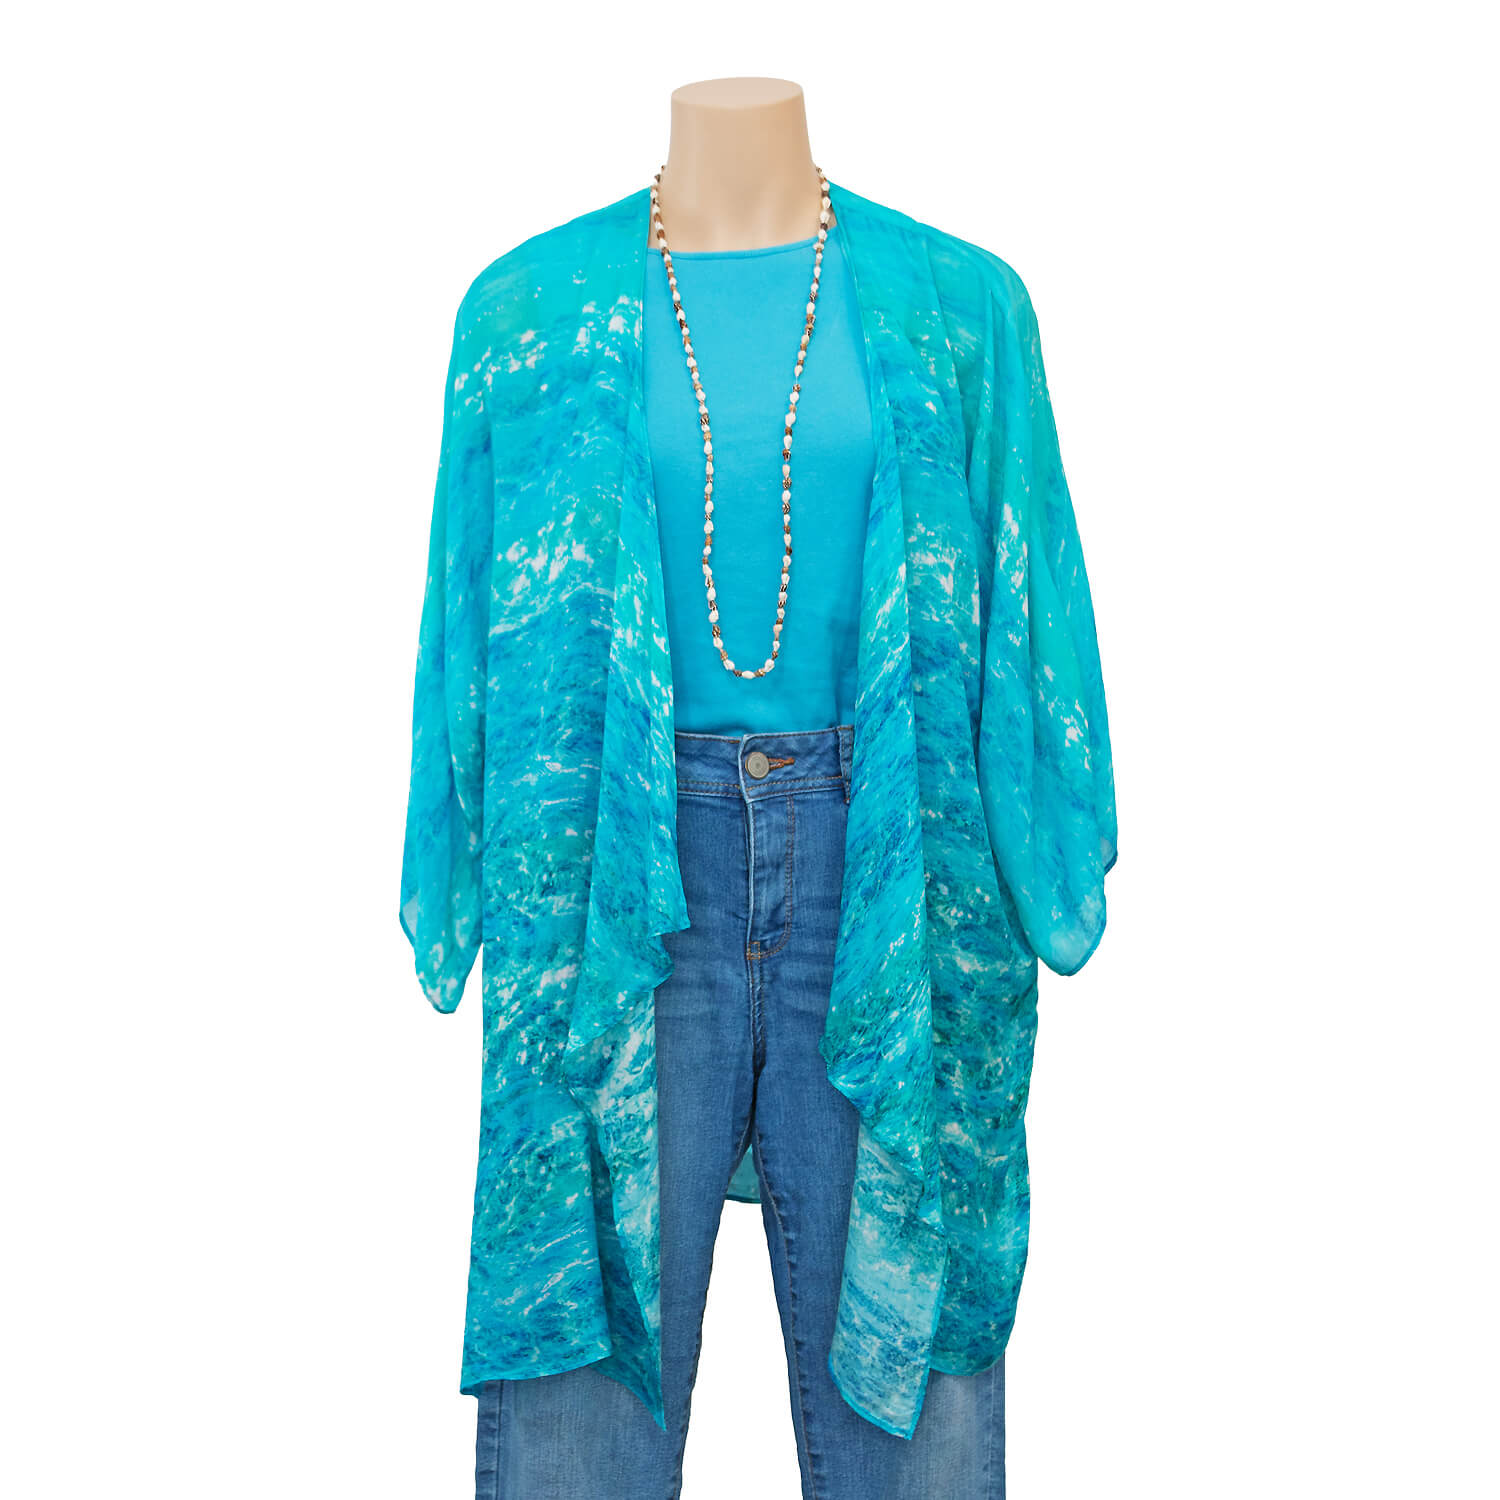 turquoise bay waterfall jacket over aqua top and jeans by seahorse silks